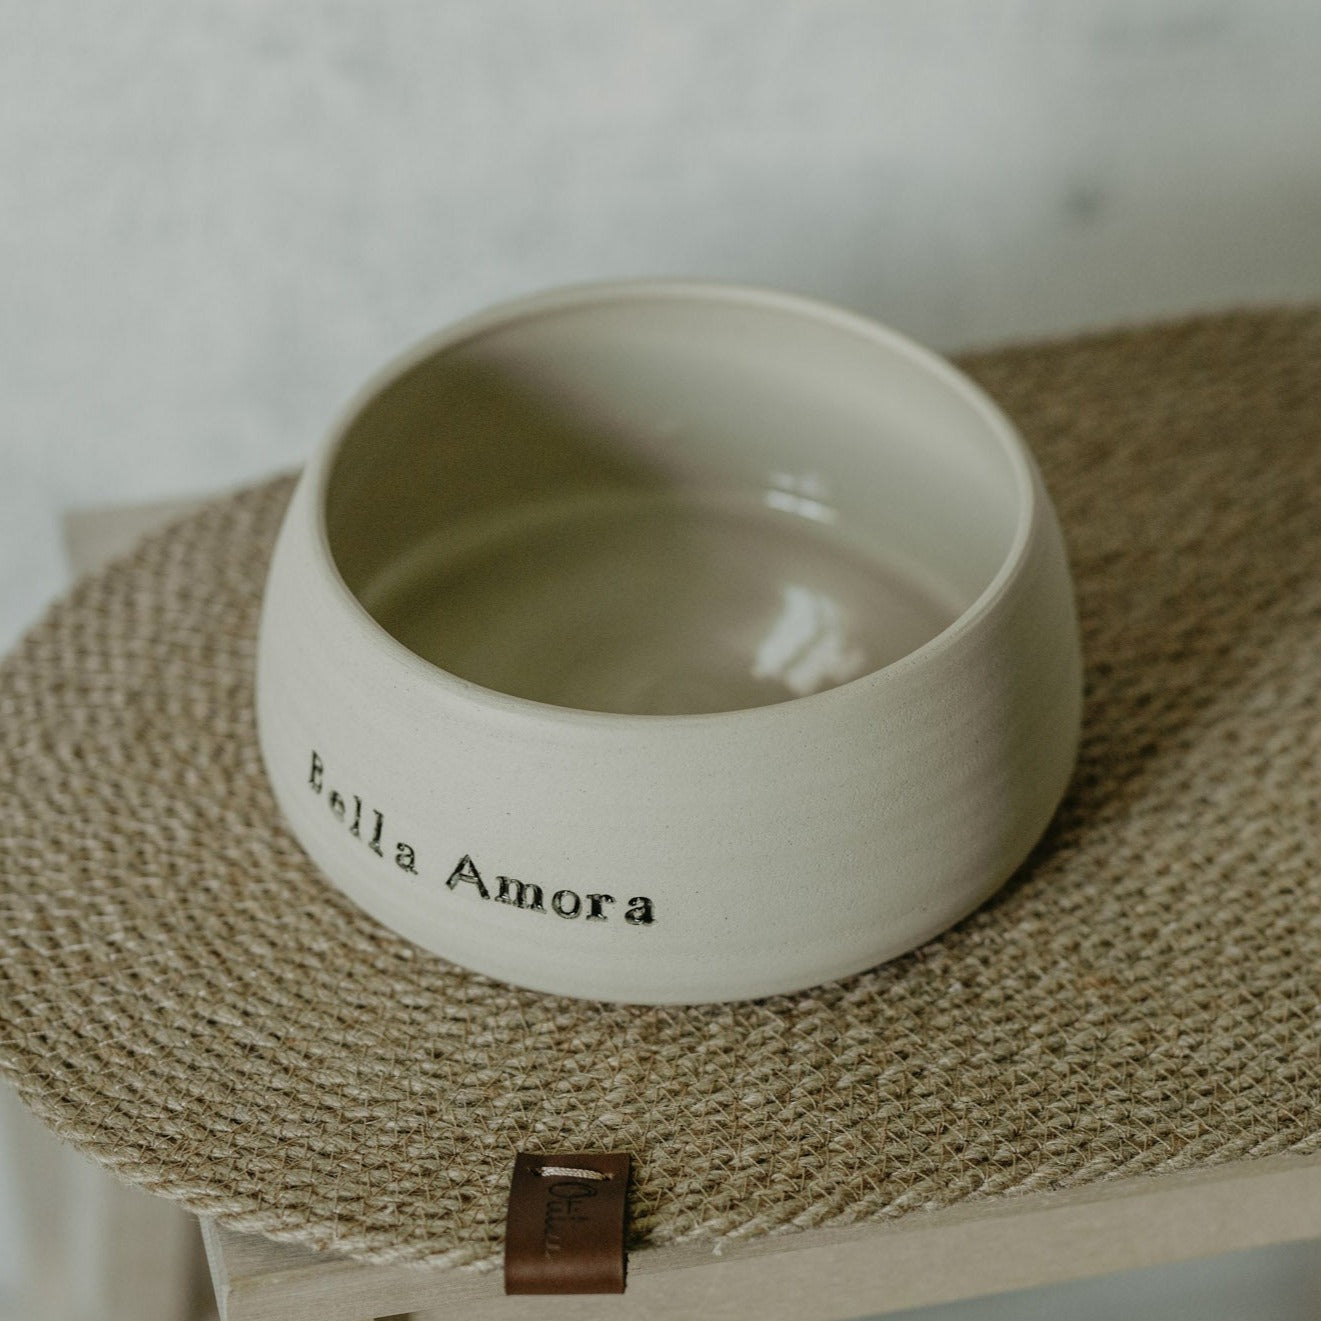 Simple and chic cream white stoneware dog bowl - personalized with black glazed name stamp.